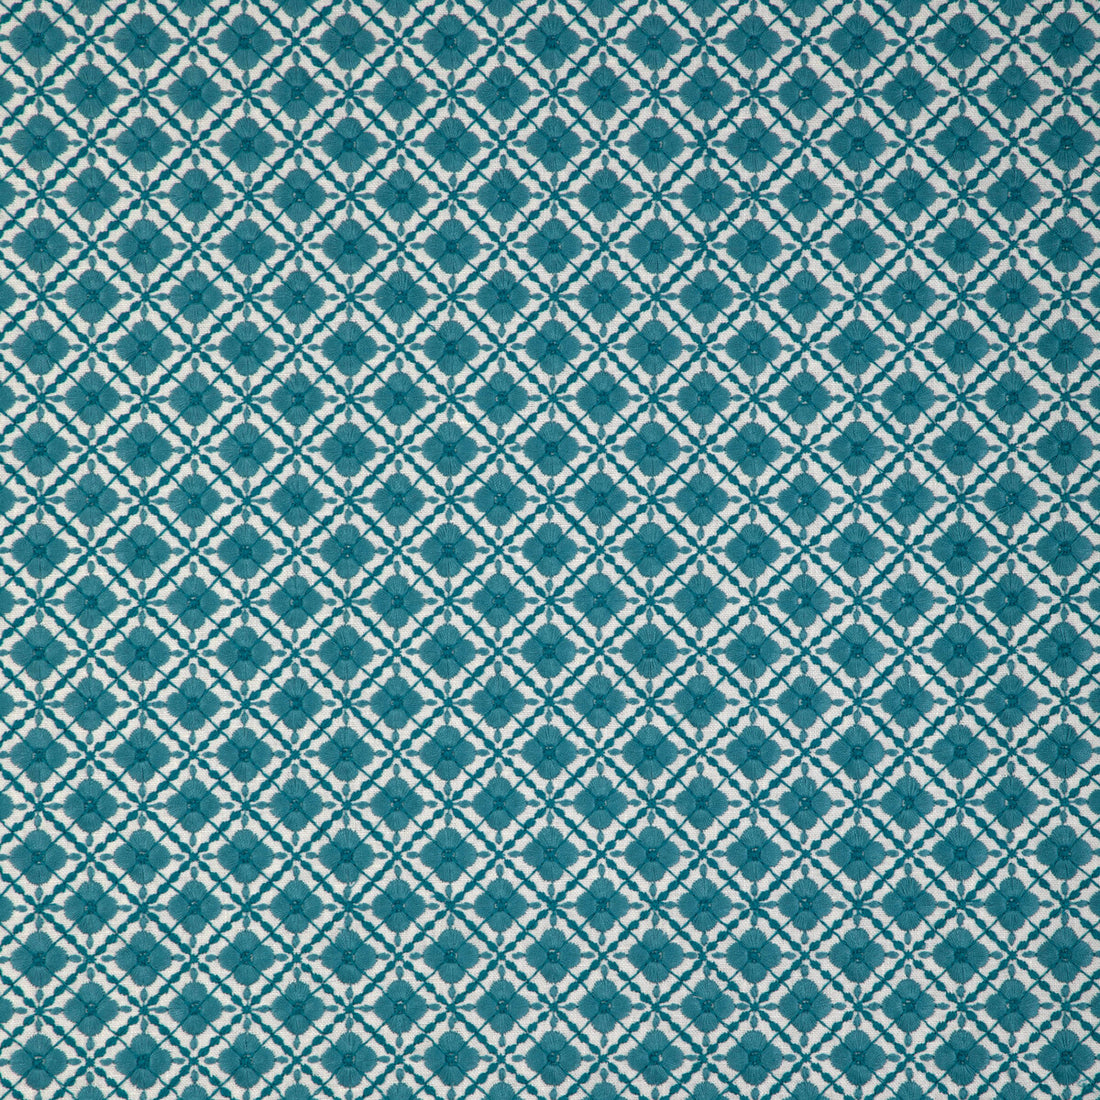 Ines Emb fabric in aqua color - pattern 8023119.1313.0 - by Brunschwig &amp; Fils in the Anduze Embroideries collection